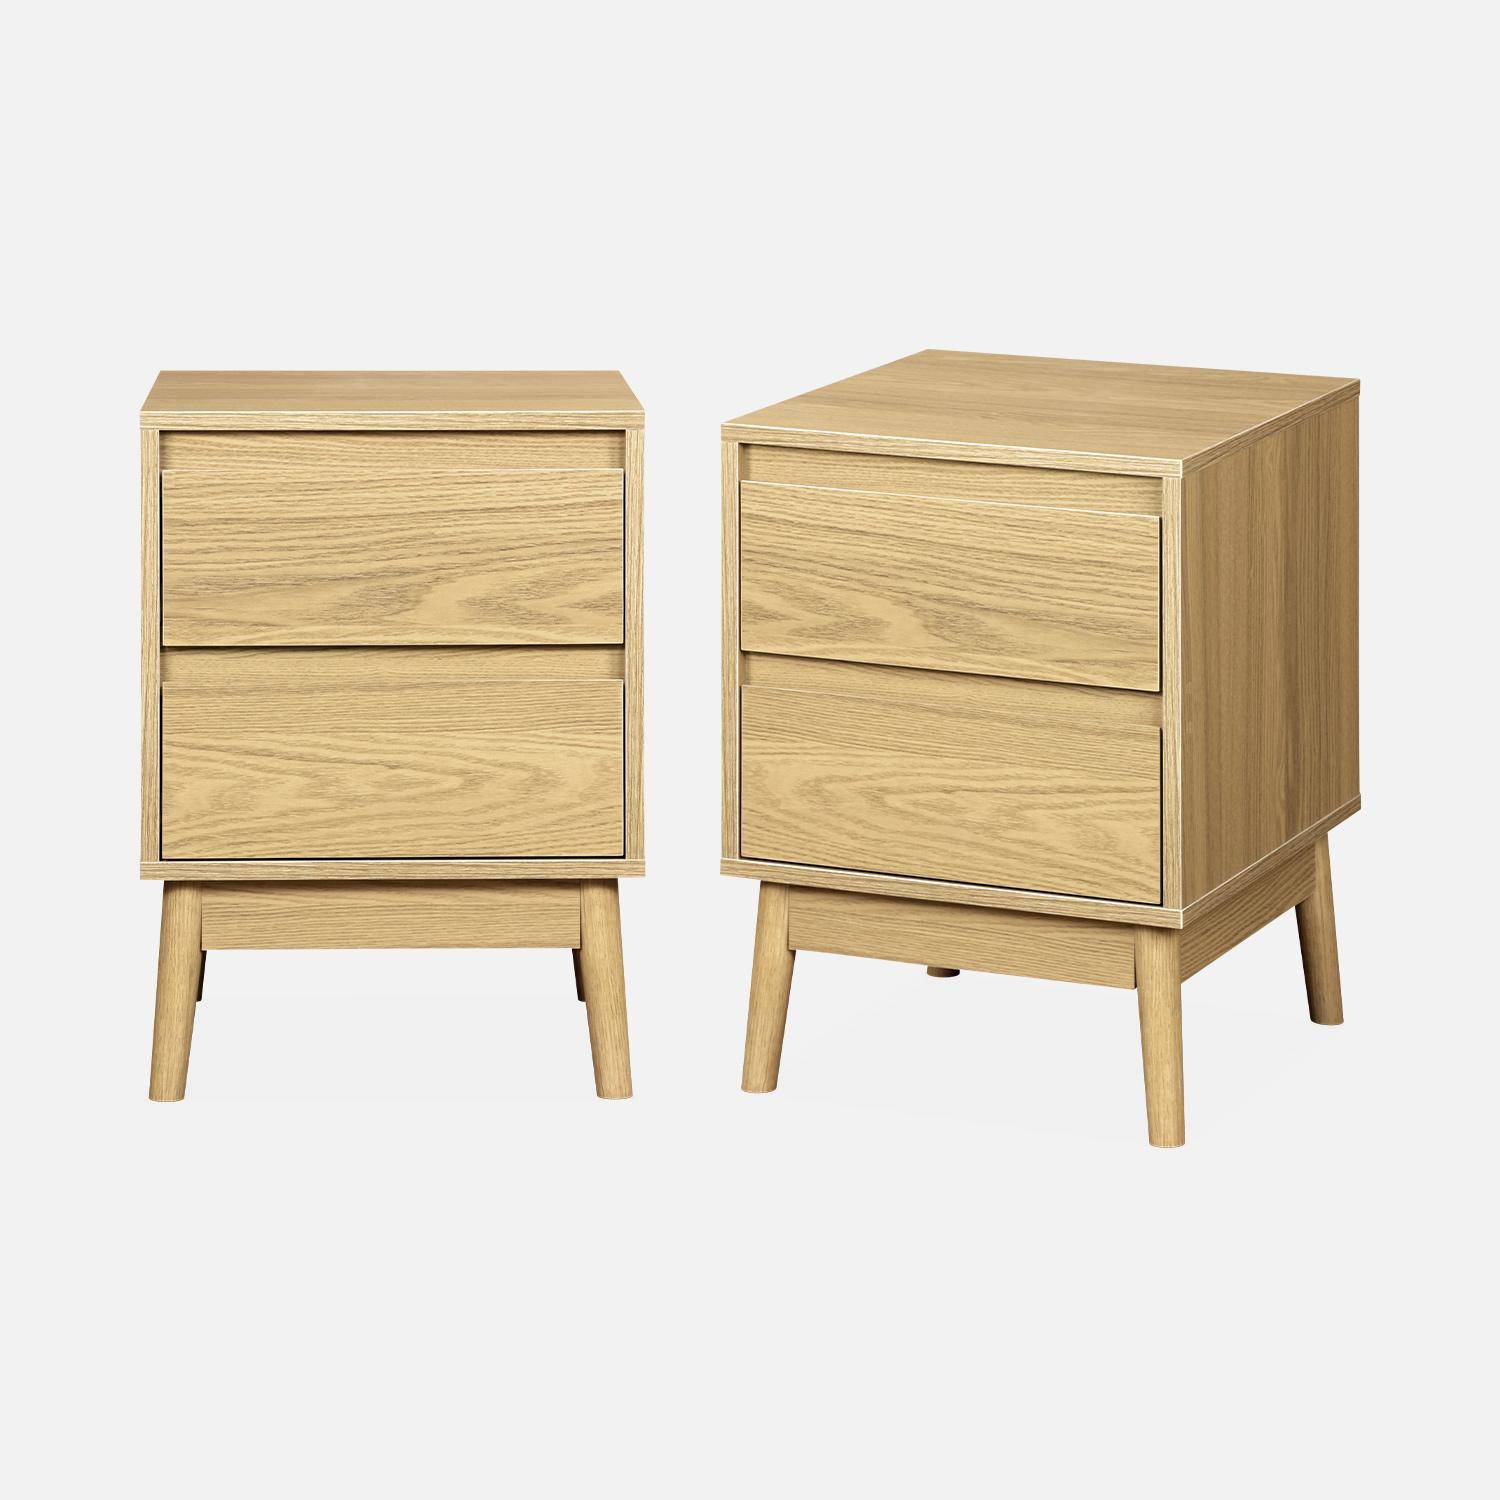 Pair of bedside tables with 2 drawers, 26x40x56cm - Dune - Natural,sweeek,Photo3